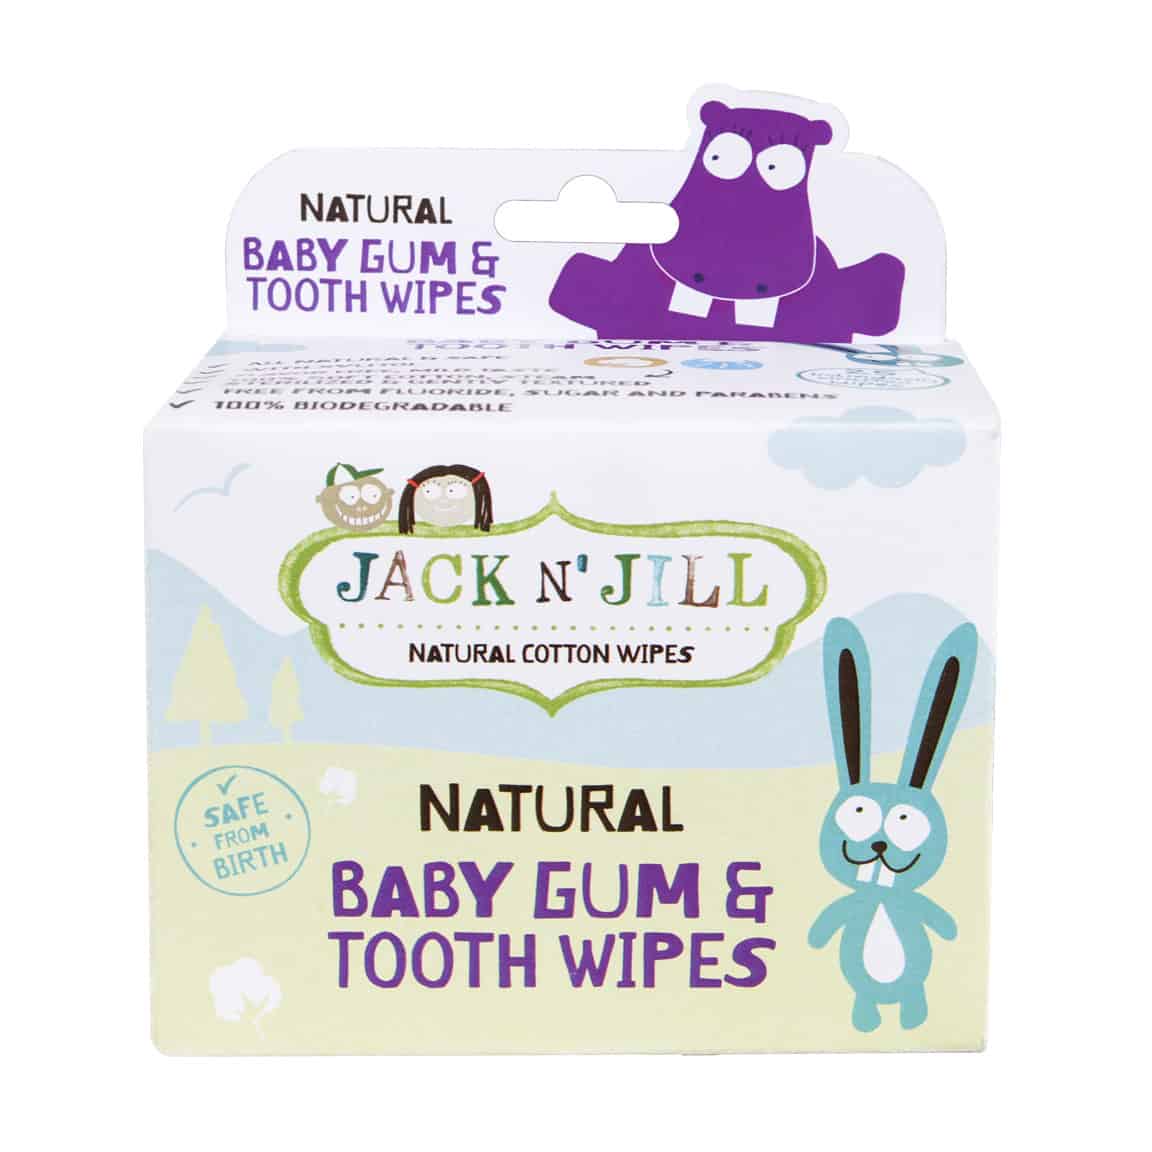 Gum & Tooth Wipes